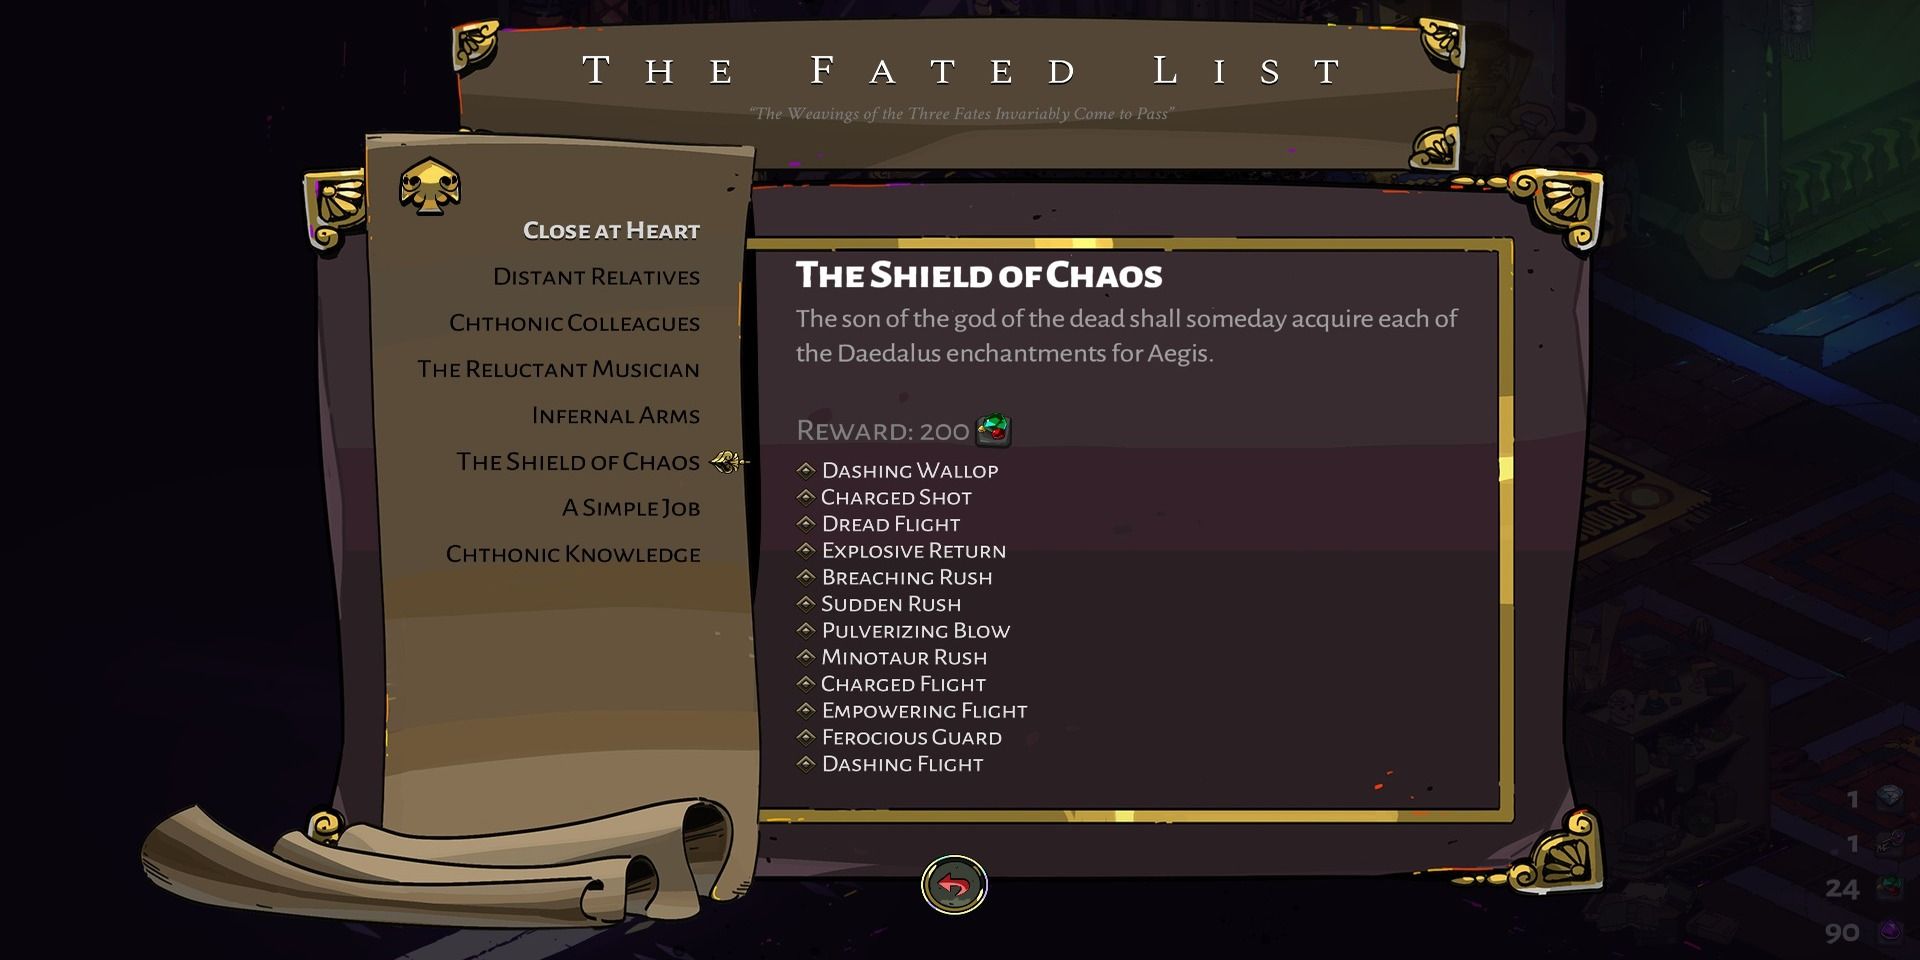 Shield of Chaos Fated List in game screenshot Hades